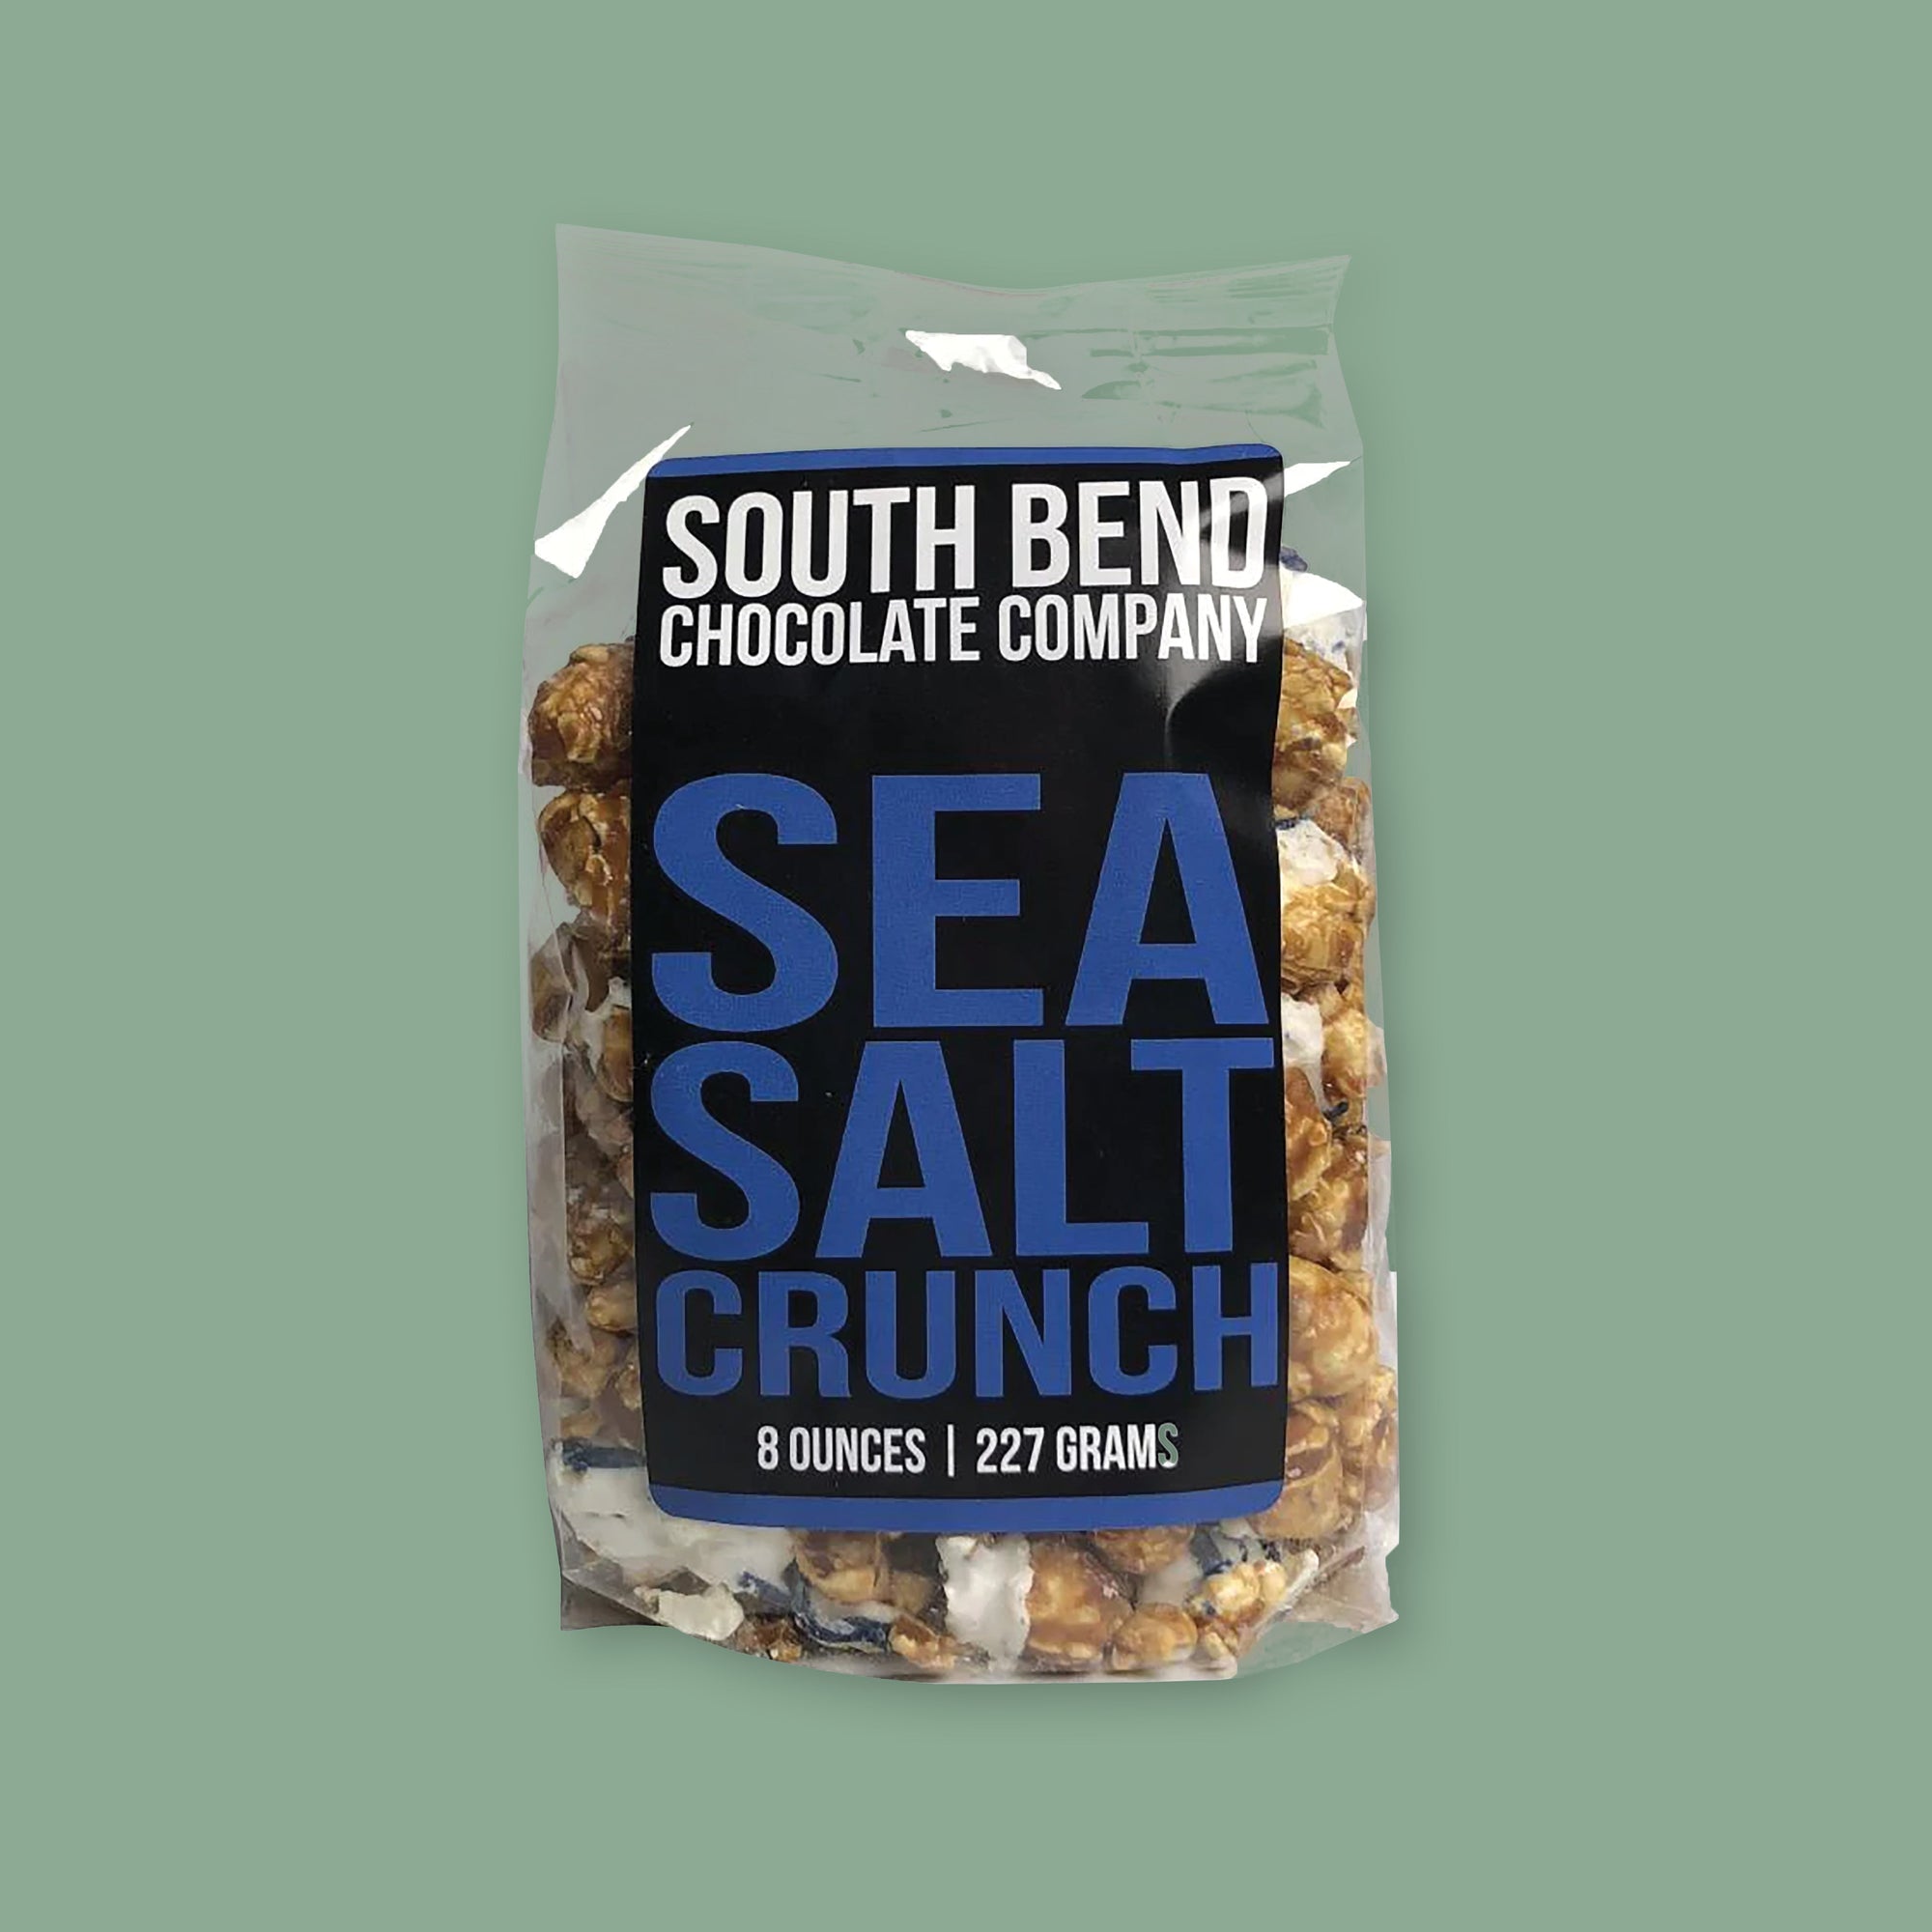 On a moss green background sits a package. This clear package is full of caramel popcorn. It has a black label on the front and it says "SOUTH BEND CHOCOLATE COMPANY" in white, all caps block font. It also says in a bright blue "SEA SALT CRUNCH" in all caps, block font. 8 OUNCES | 227 GRAMS